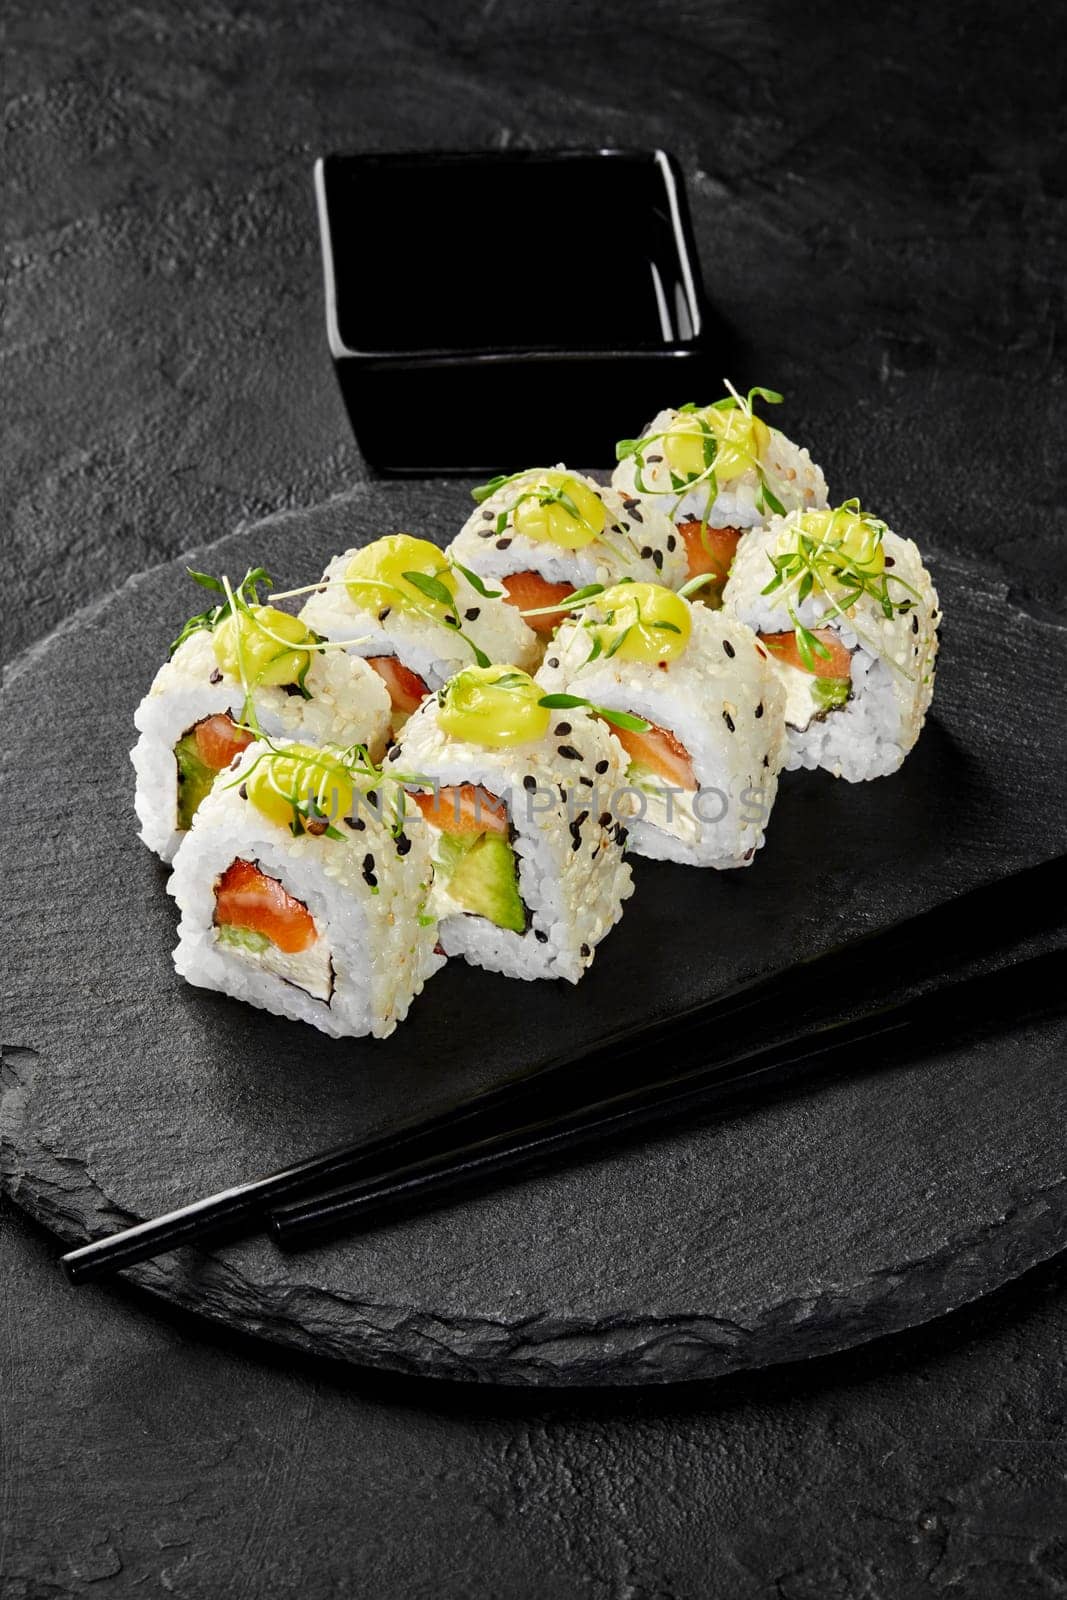 Sesame coated sushi rolls with salmon, avocado and cream cheese by nazarovsergey